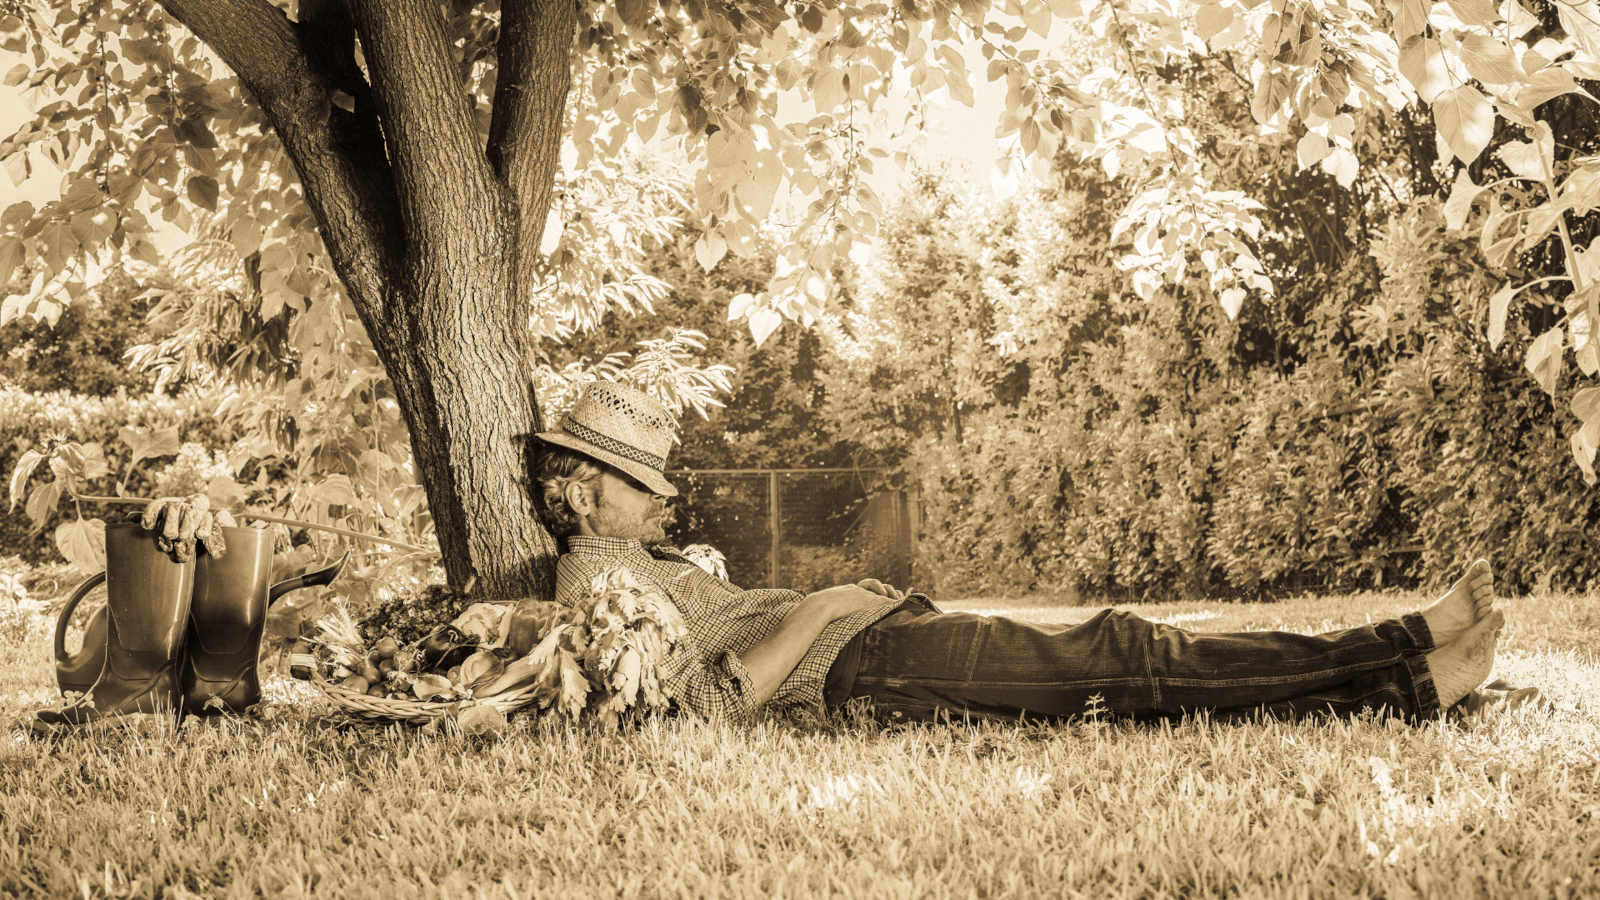 A person resting under a tree shade